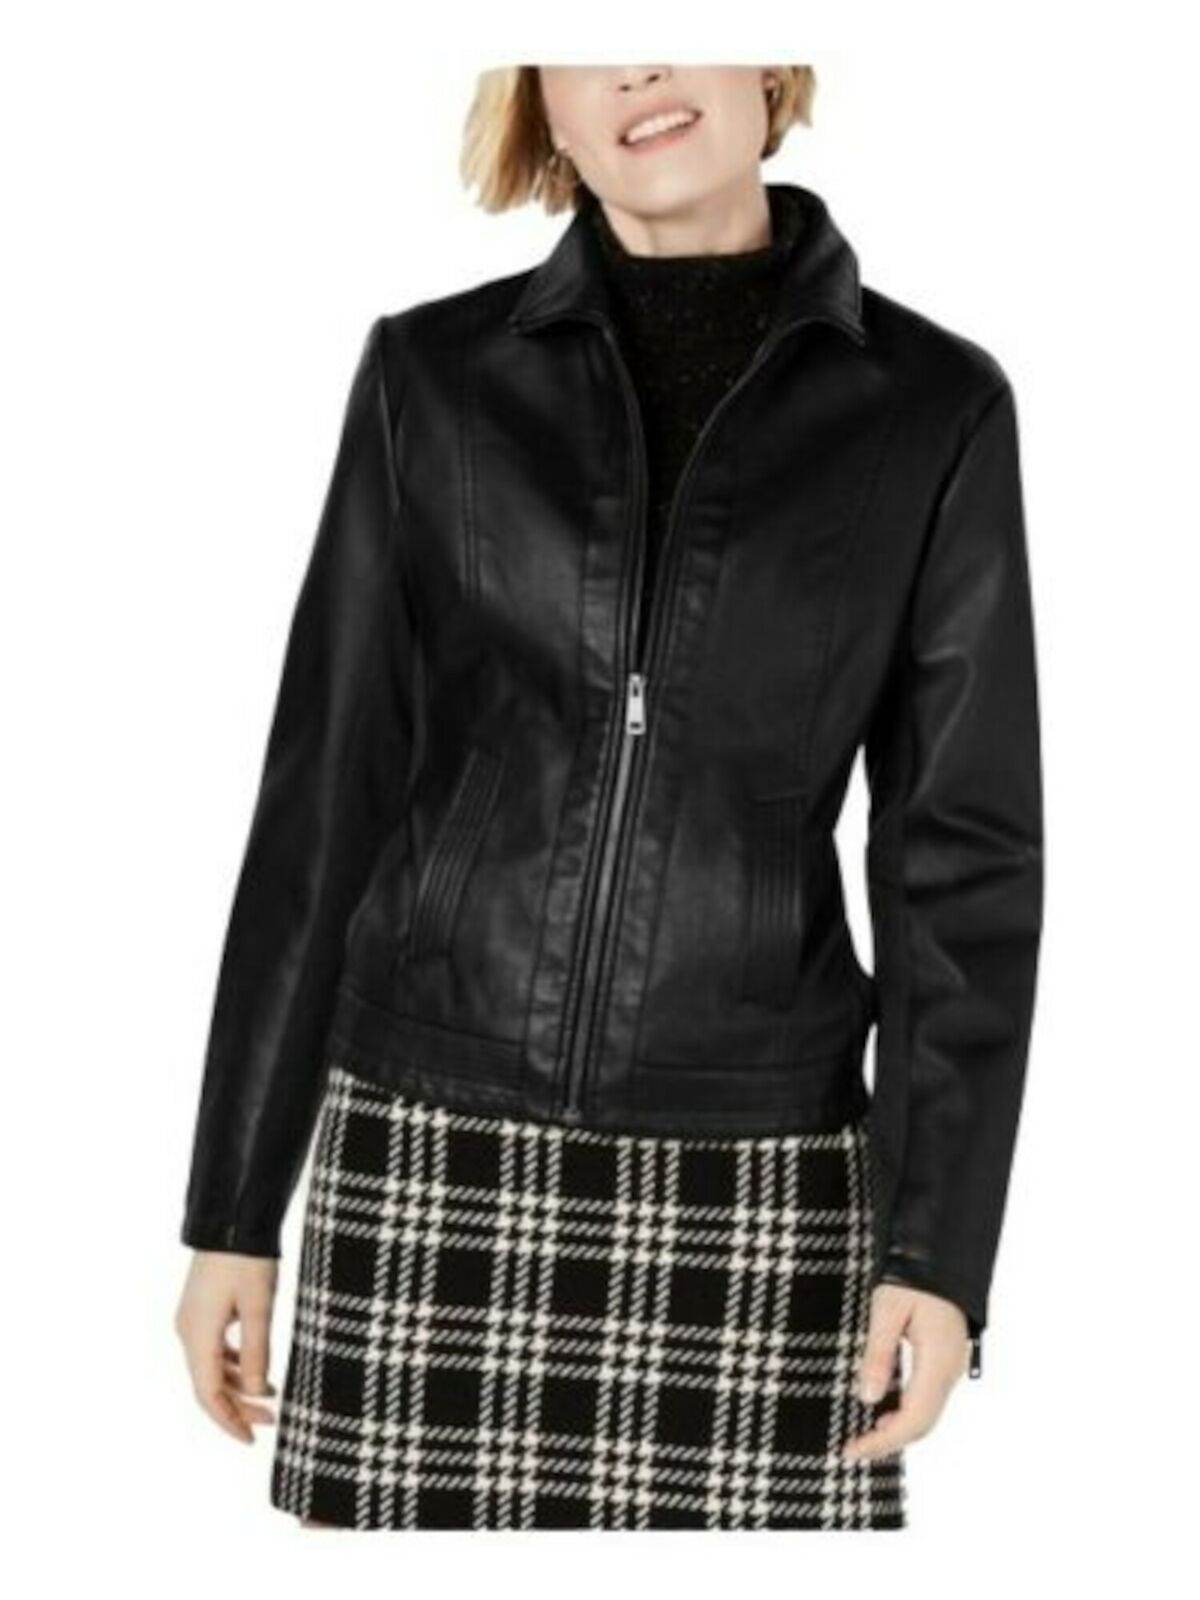 KENNETH COLE Women’s Brown Faux Leather Zip Up Jacket 17LMU679